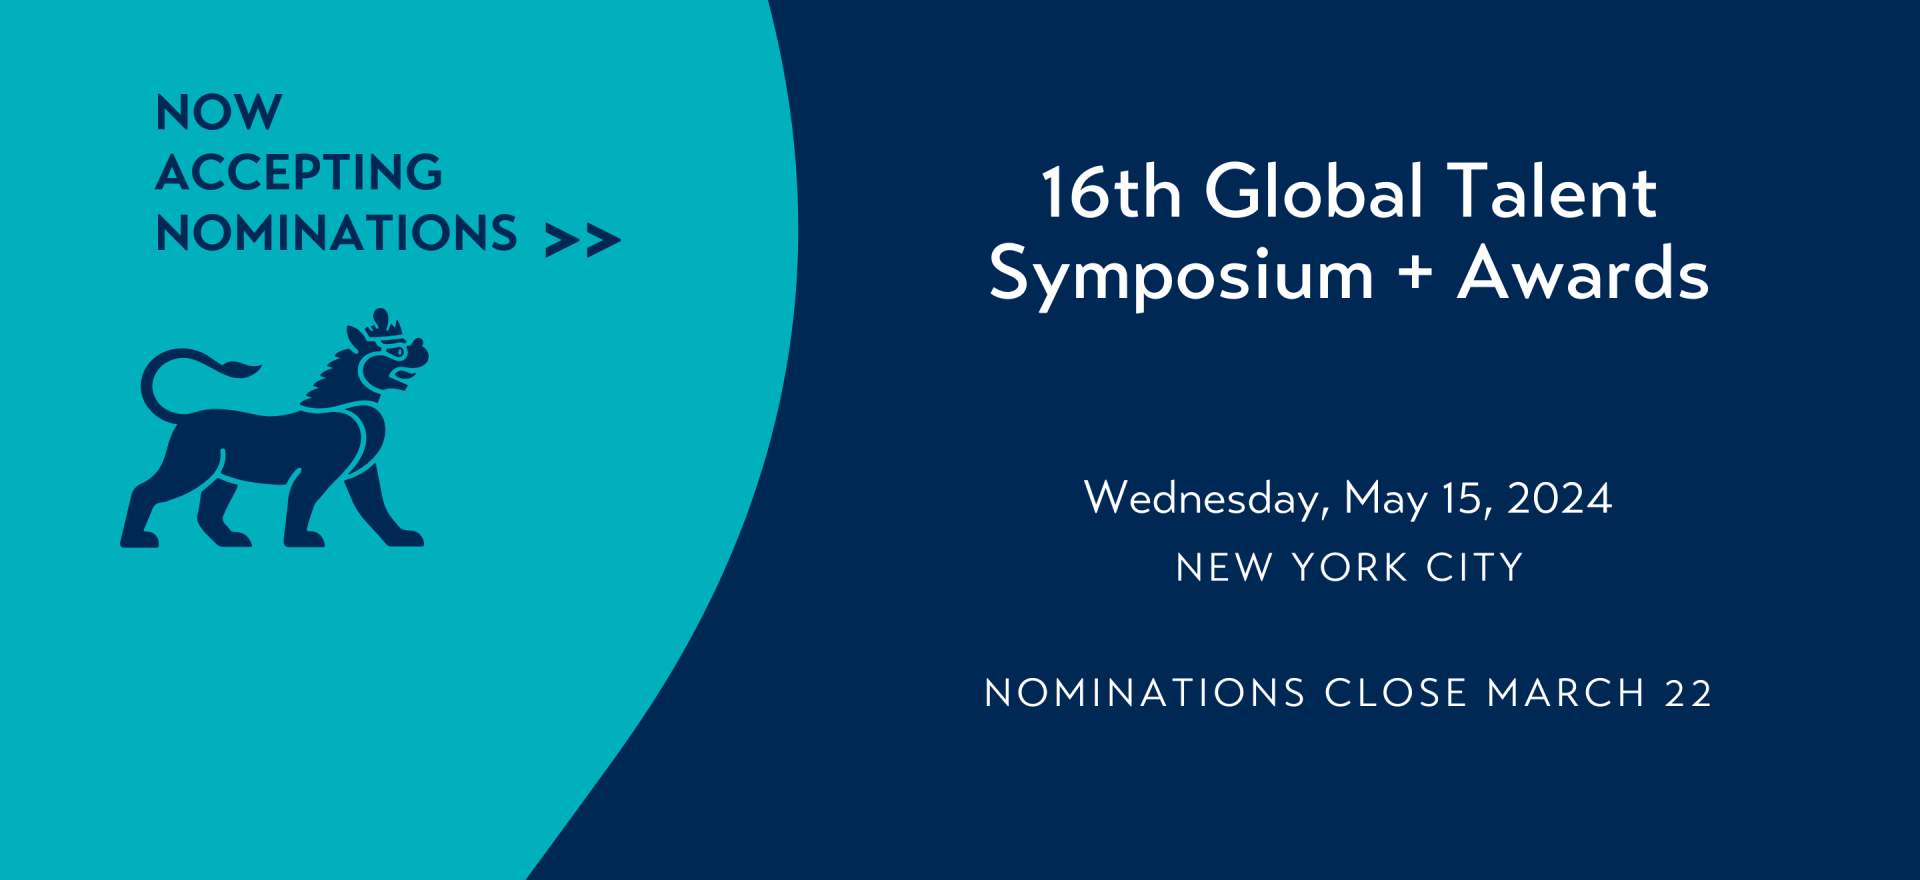 16th Annual Global Talent Symposium and Awards. Nominations close March 22, 2024.